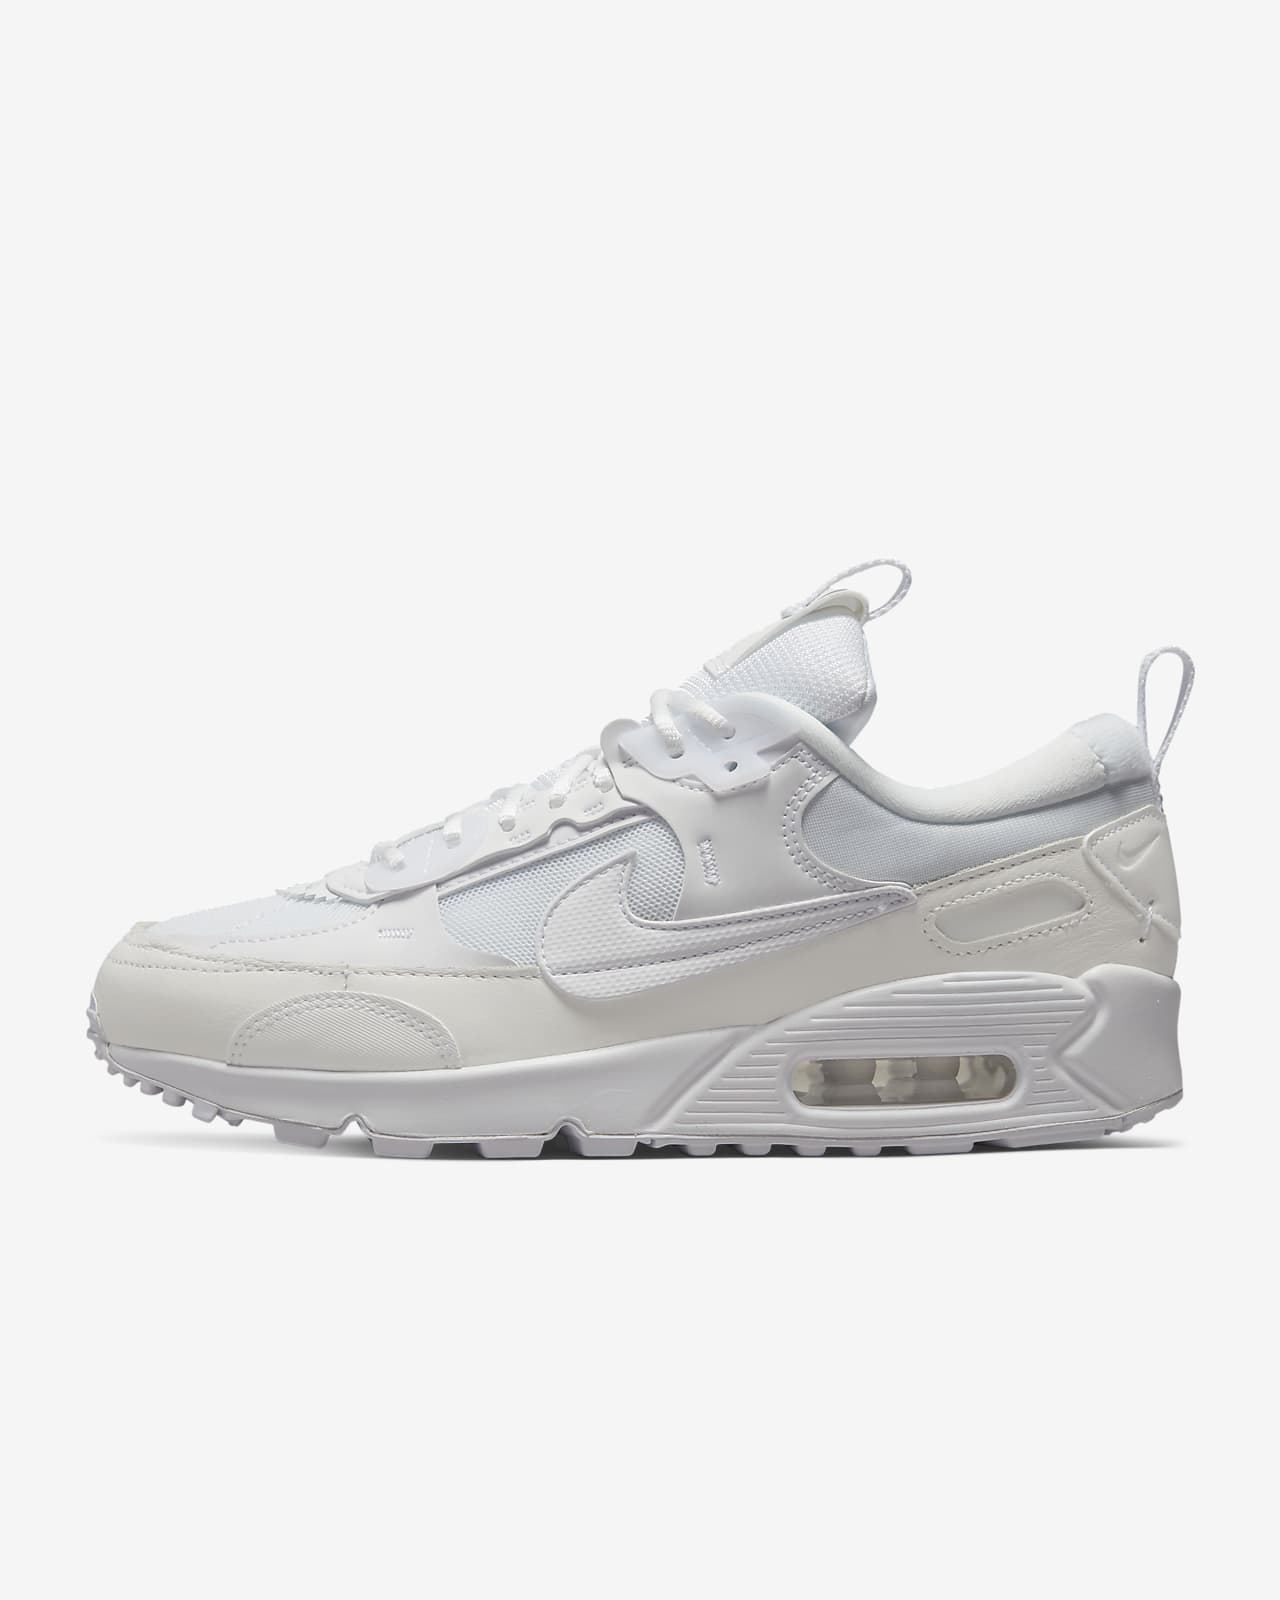 Sportsman Frank difference Nike Air Max 90 Futura Women's Shoes. Nike.com